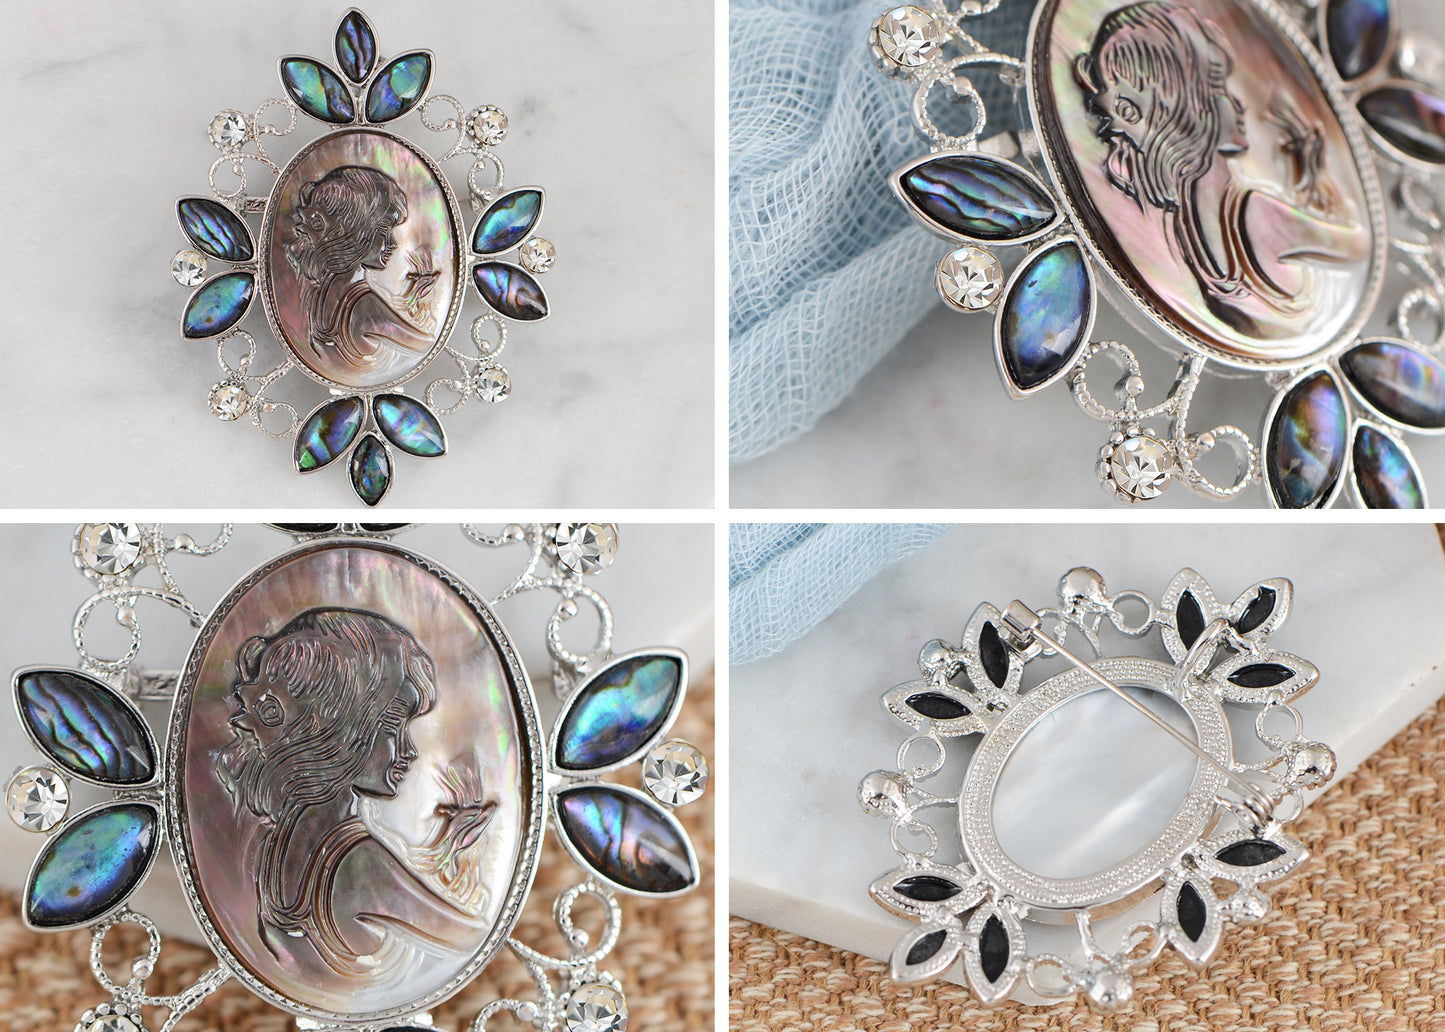 Alilang Vintage Inspired Abalone Shell Clear Crystal Rhinestone Lady Cameo Brooch Pin Maiden Flower Pendant